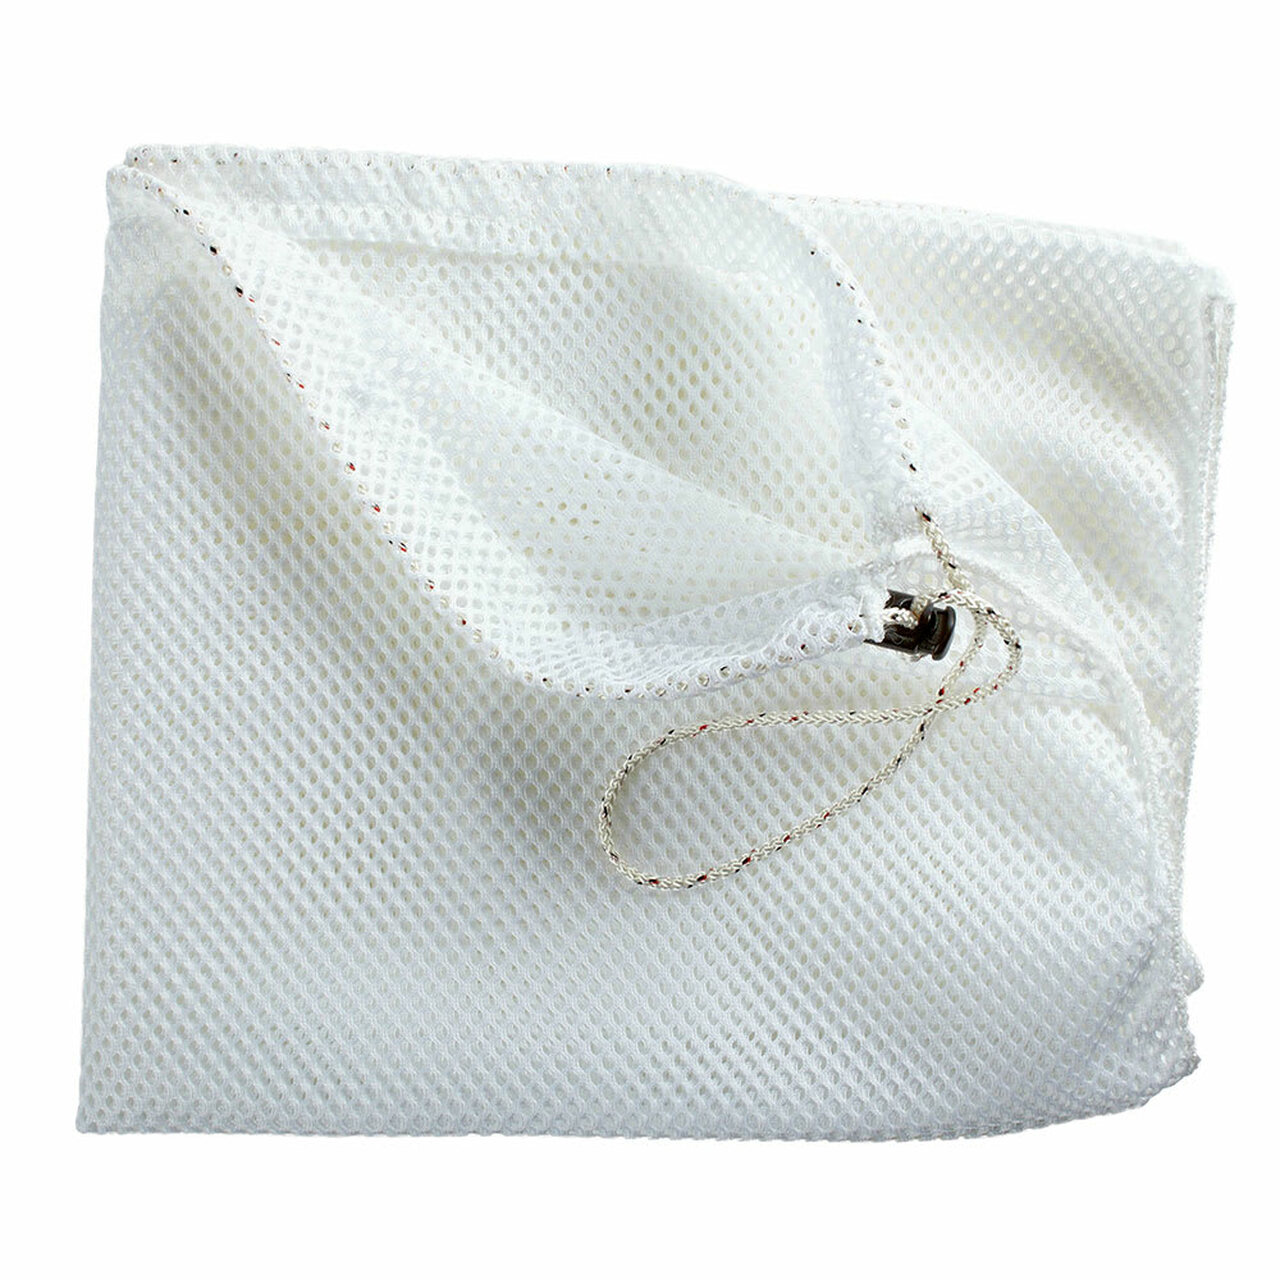 Net Laundry Bags with Closure